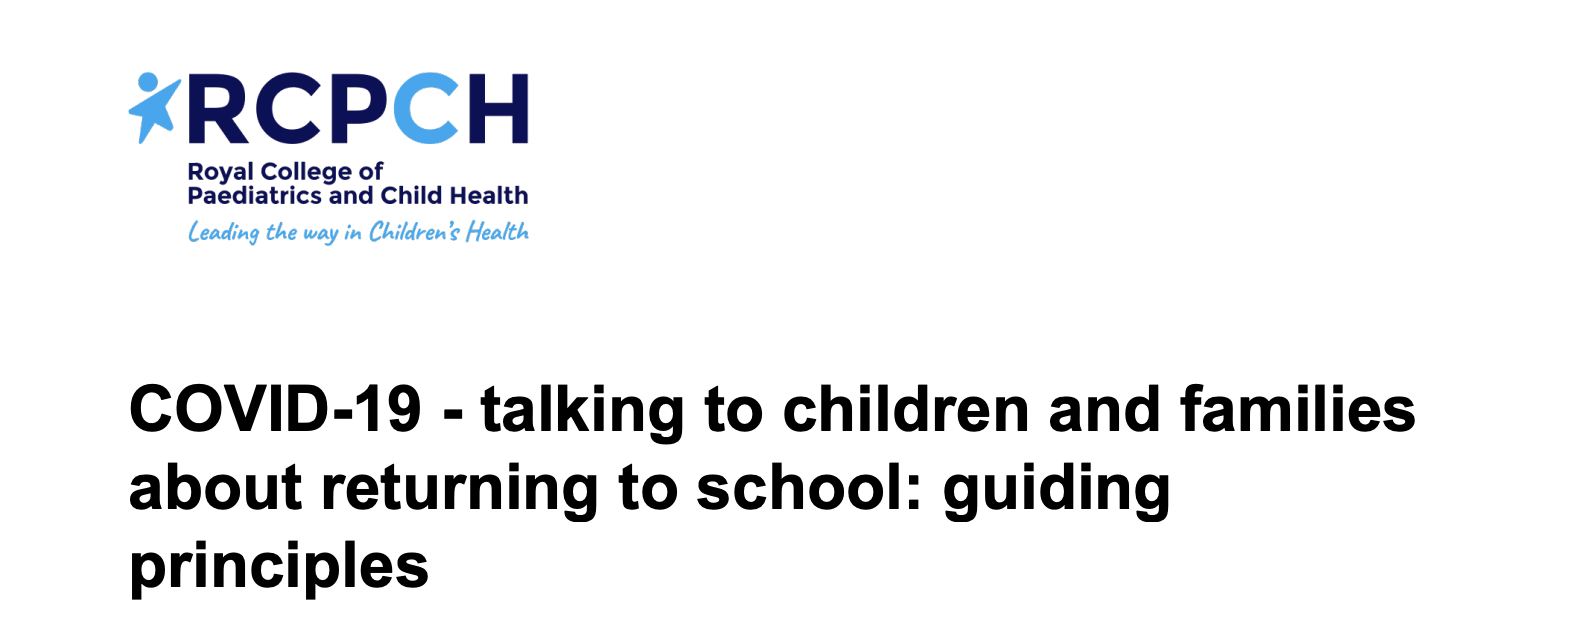 COVID-19 - returning to school: RCPCH's guiding principles